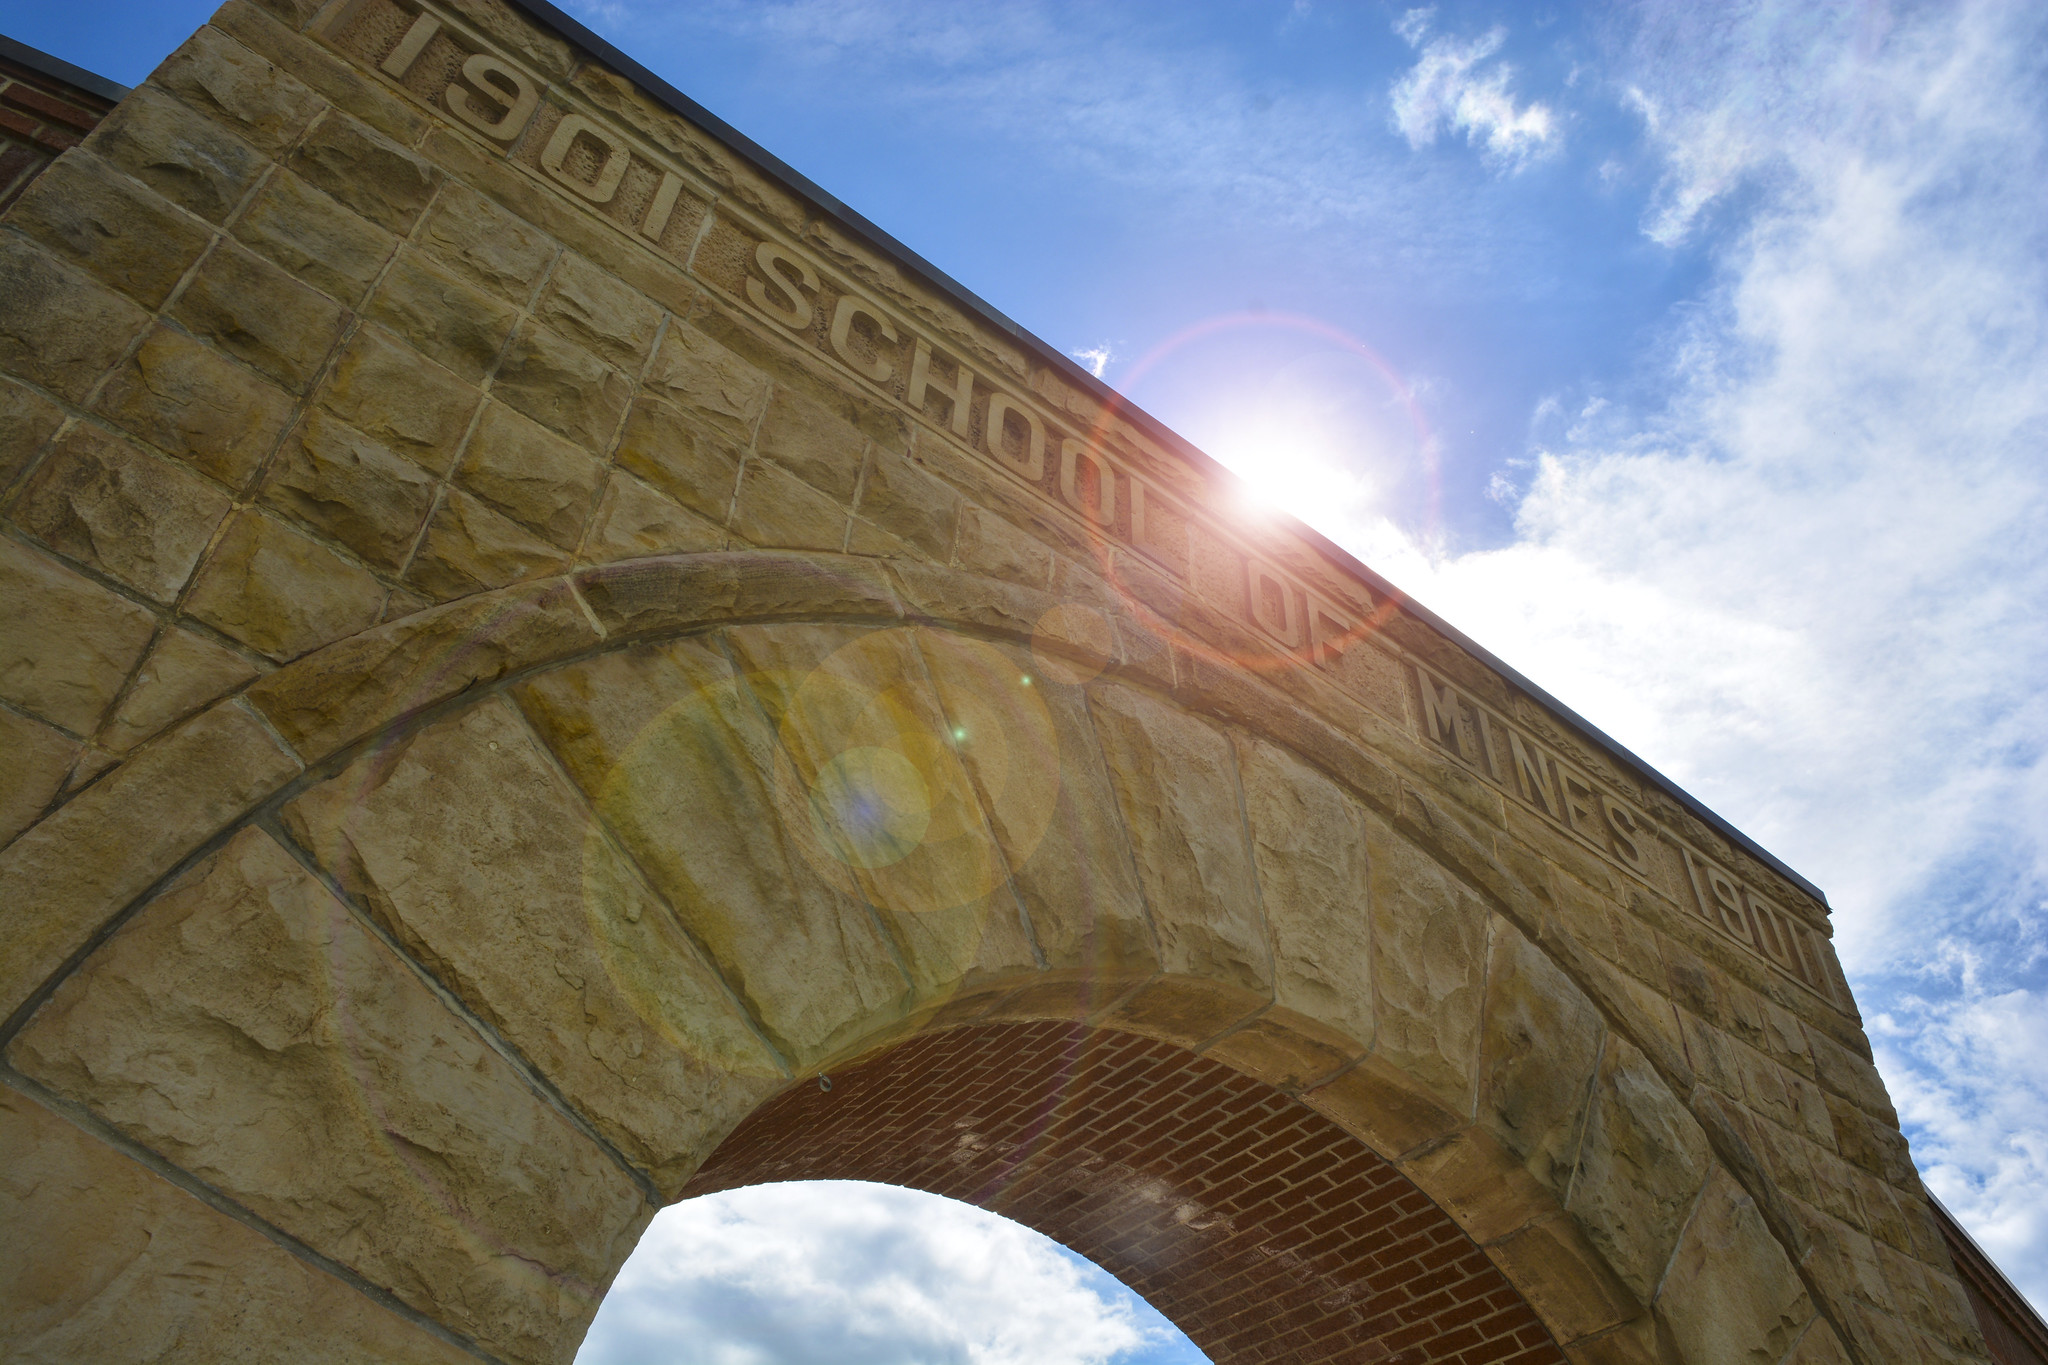 Campus arch with lens flare